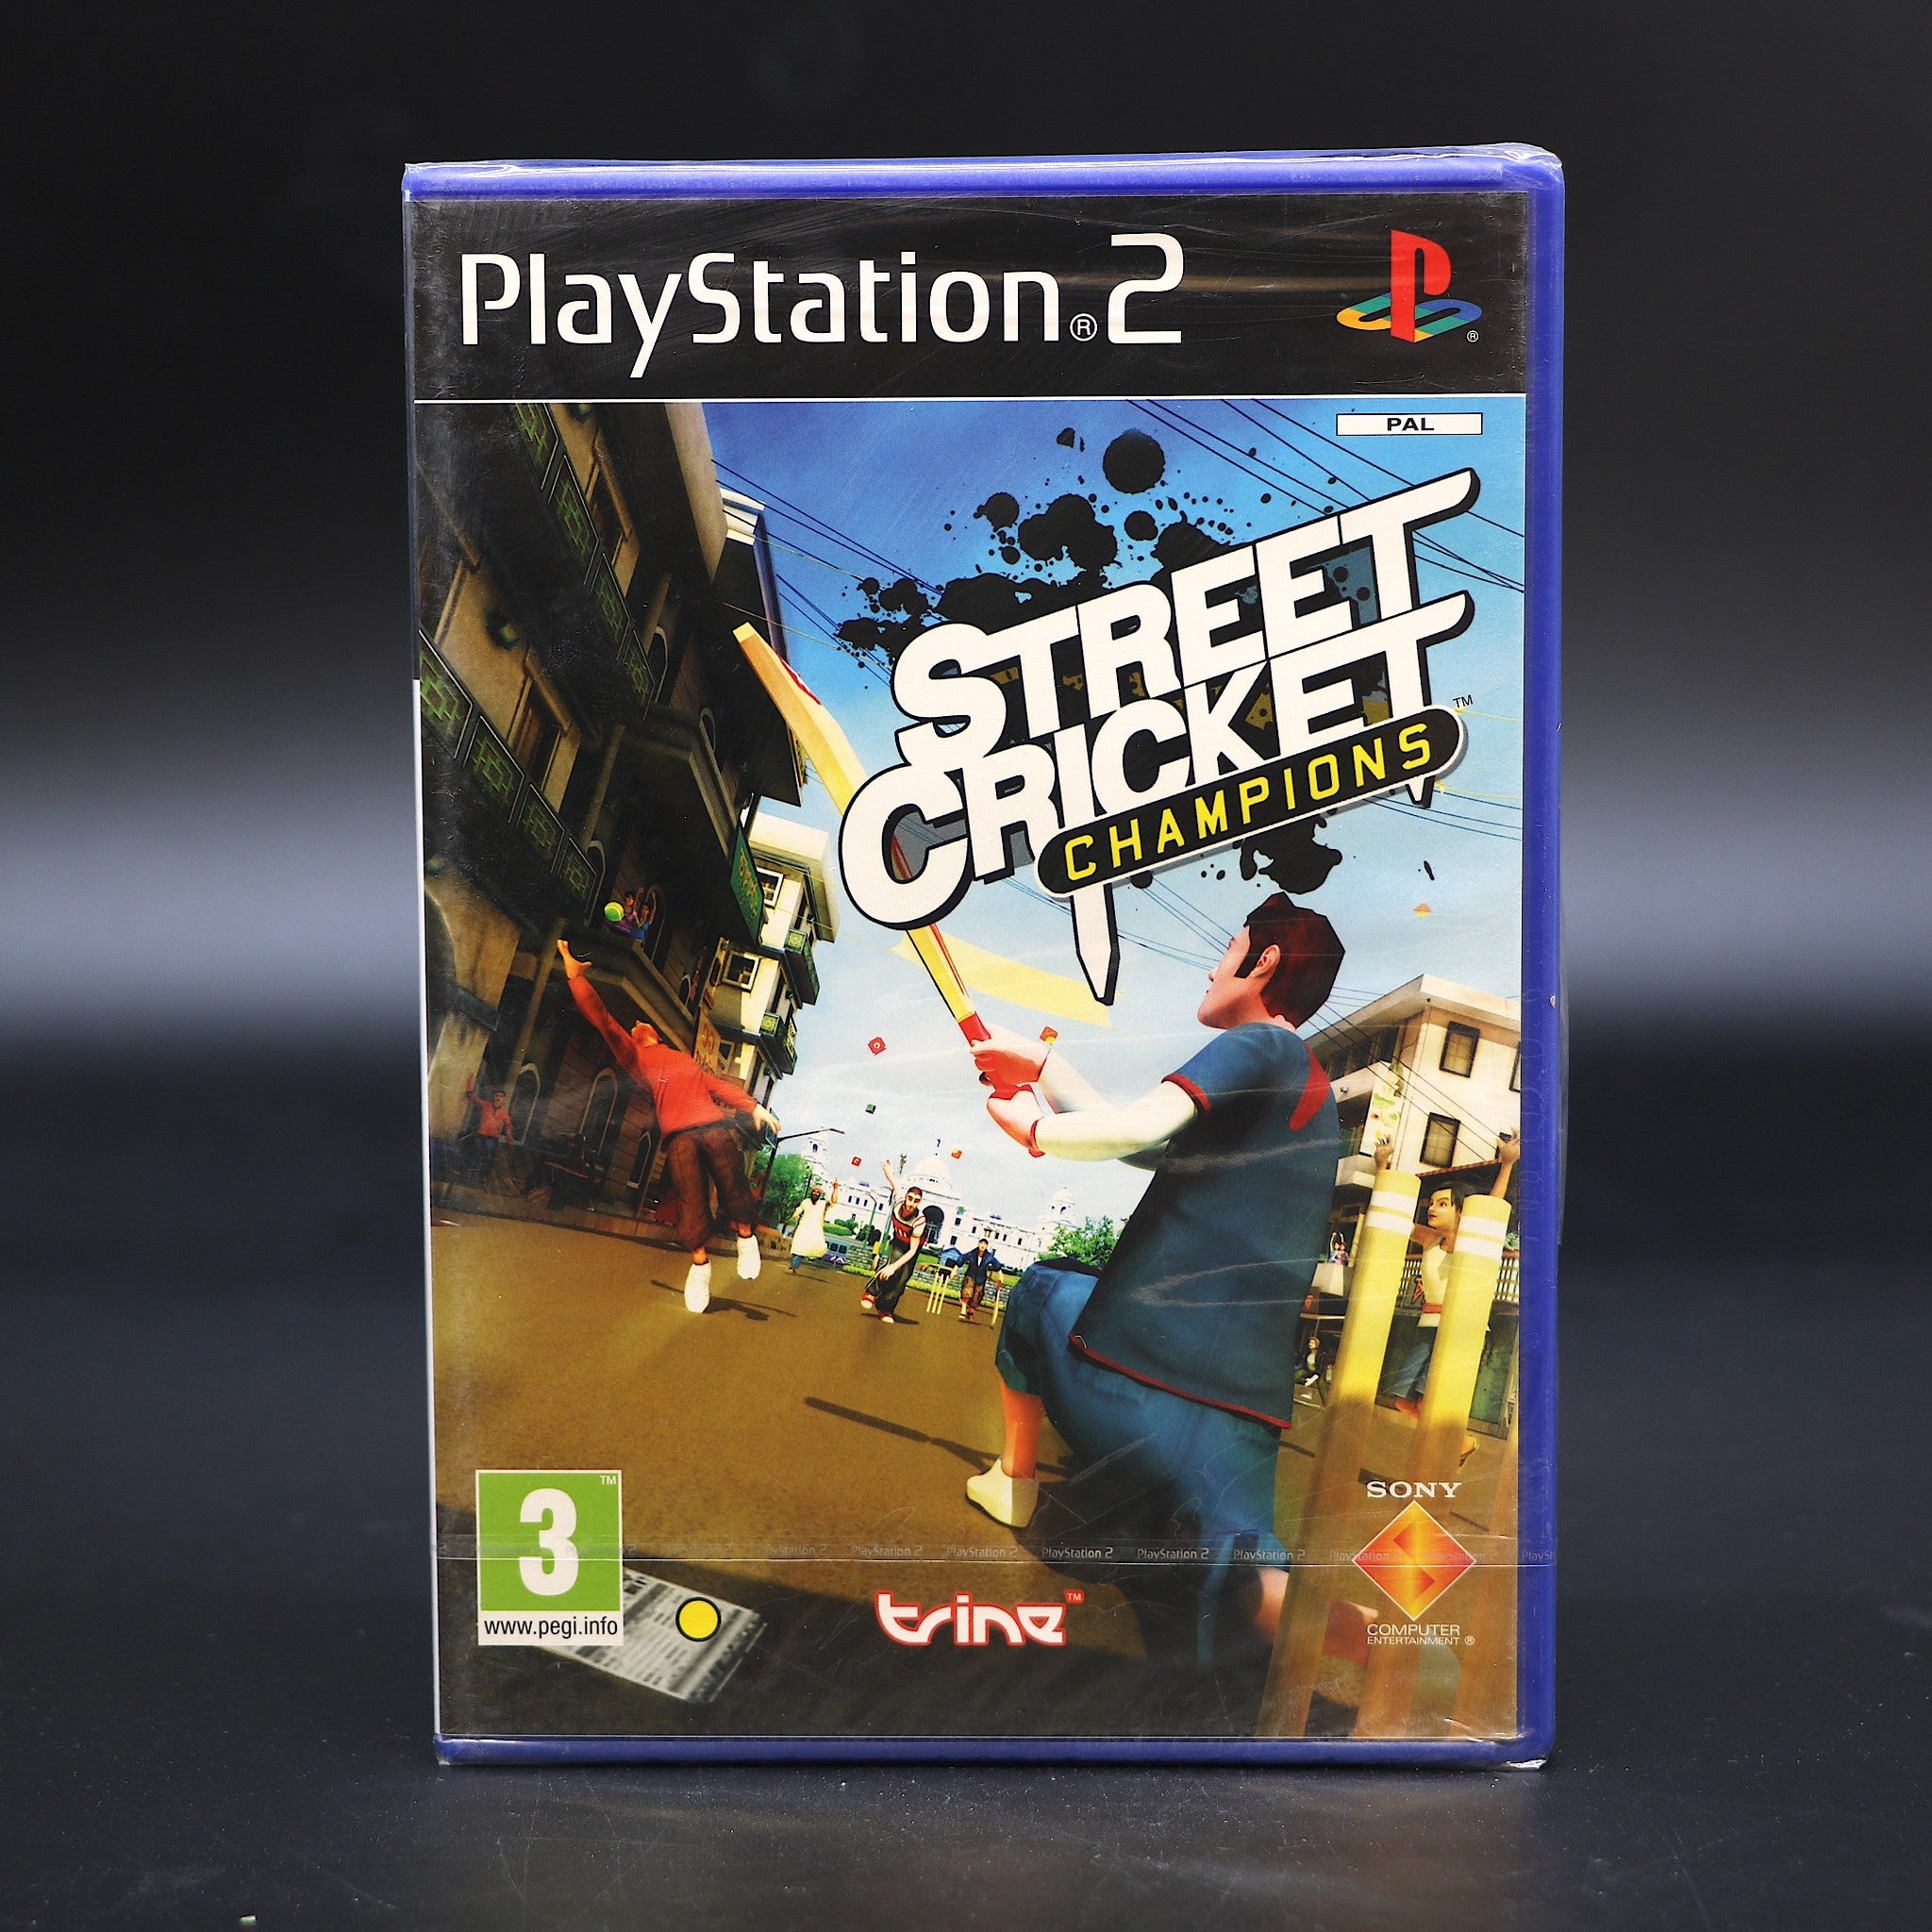 Street Cricket Champions | Sony Playstation PS2 Game | New & Sealed | Very Rare!